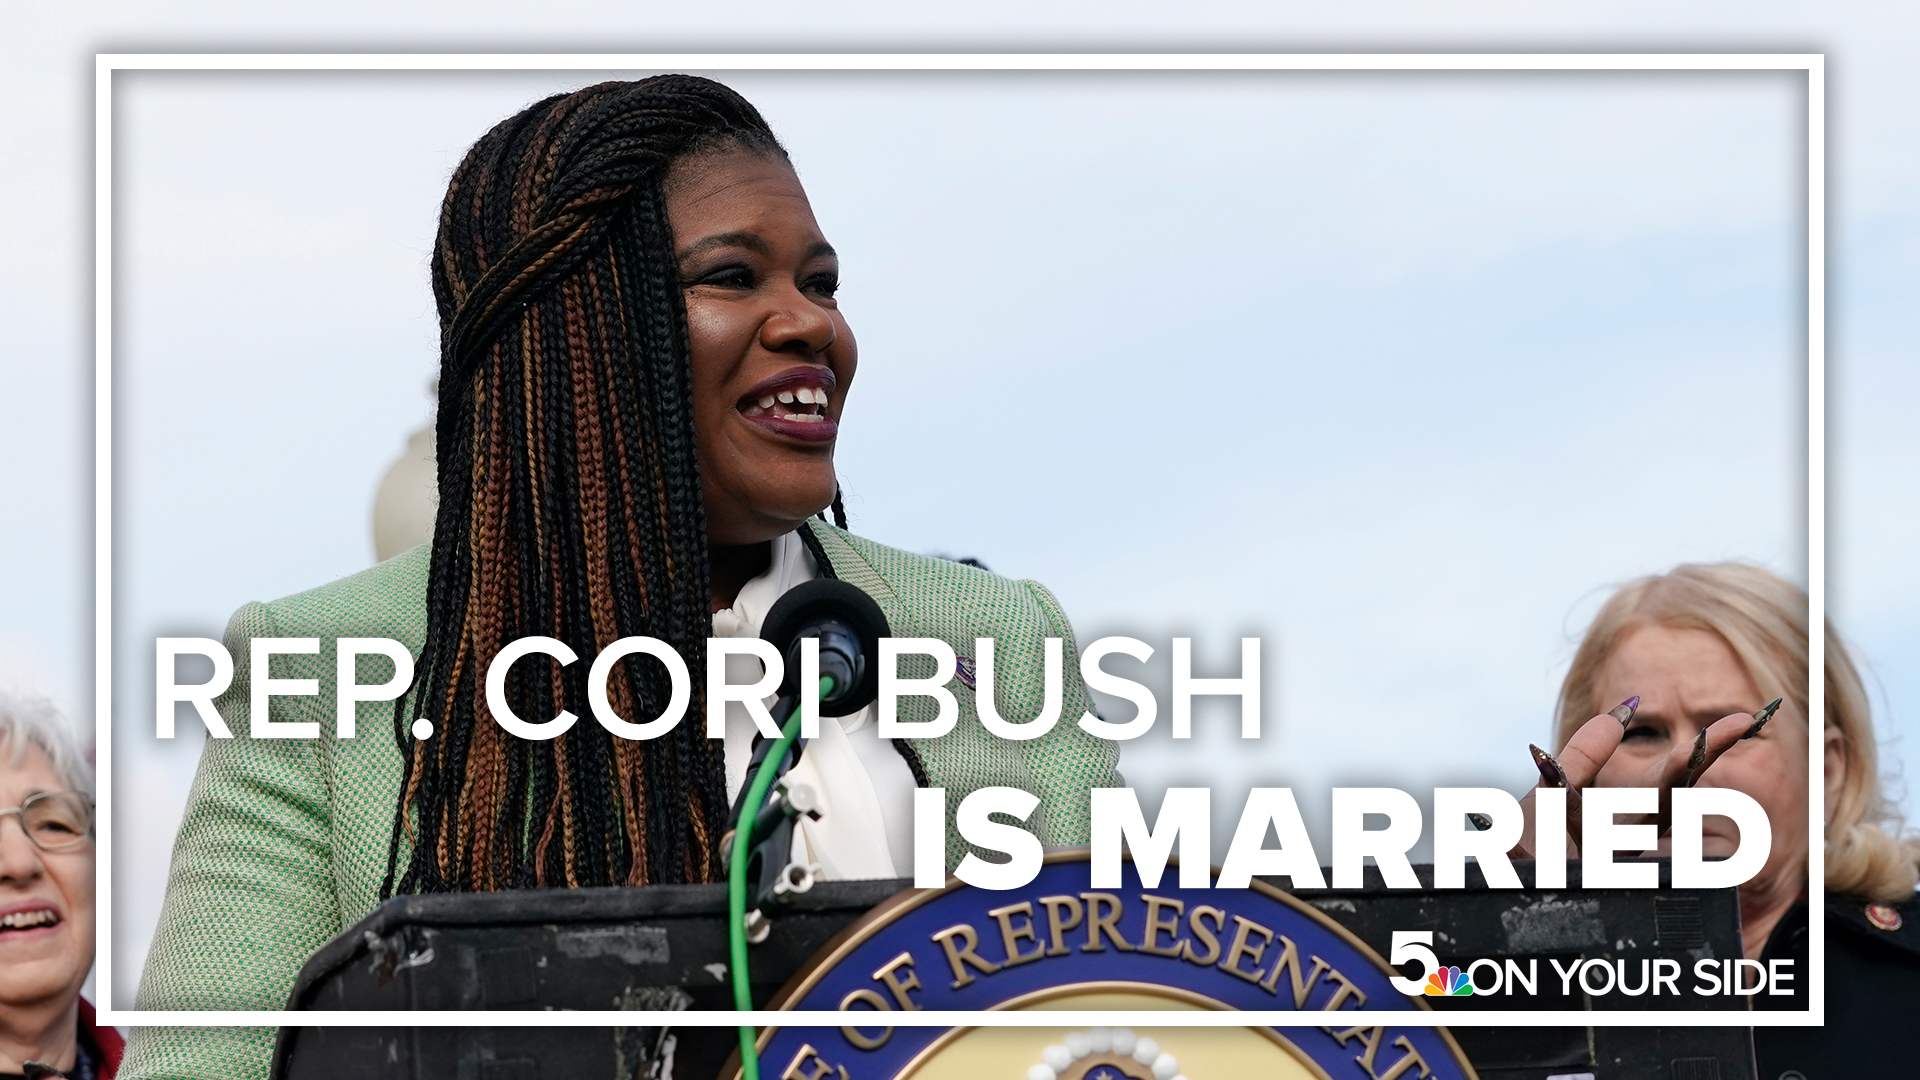 Marriage records filed in St. Louis show U.S. Rep. Cori Bush tied the knot in a private ceremony earlier this month. She married Cortney Merritts